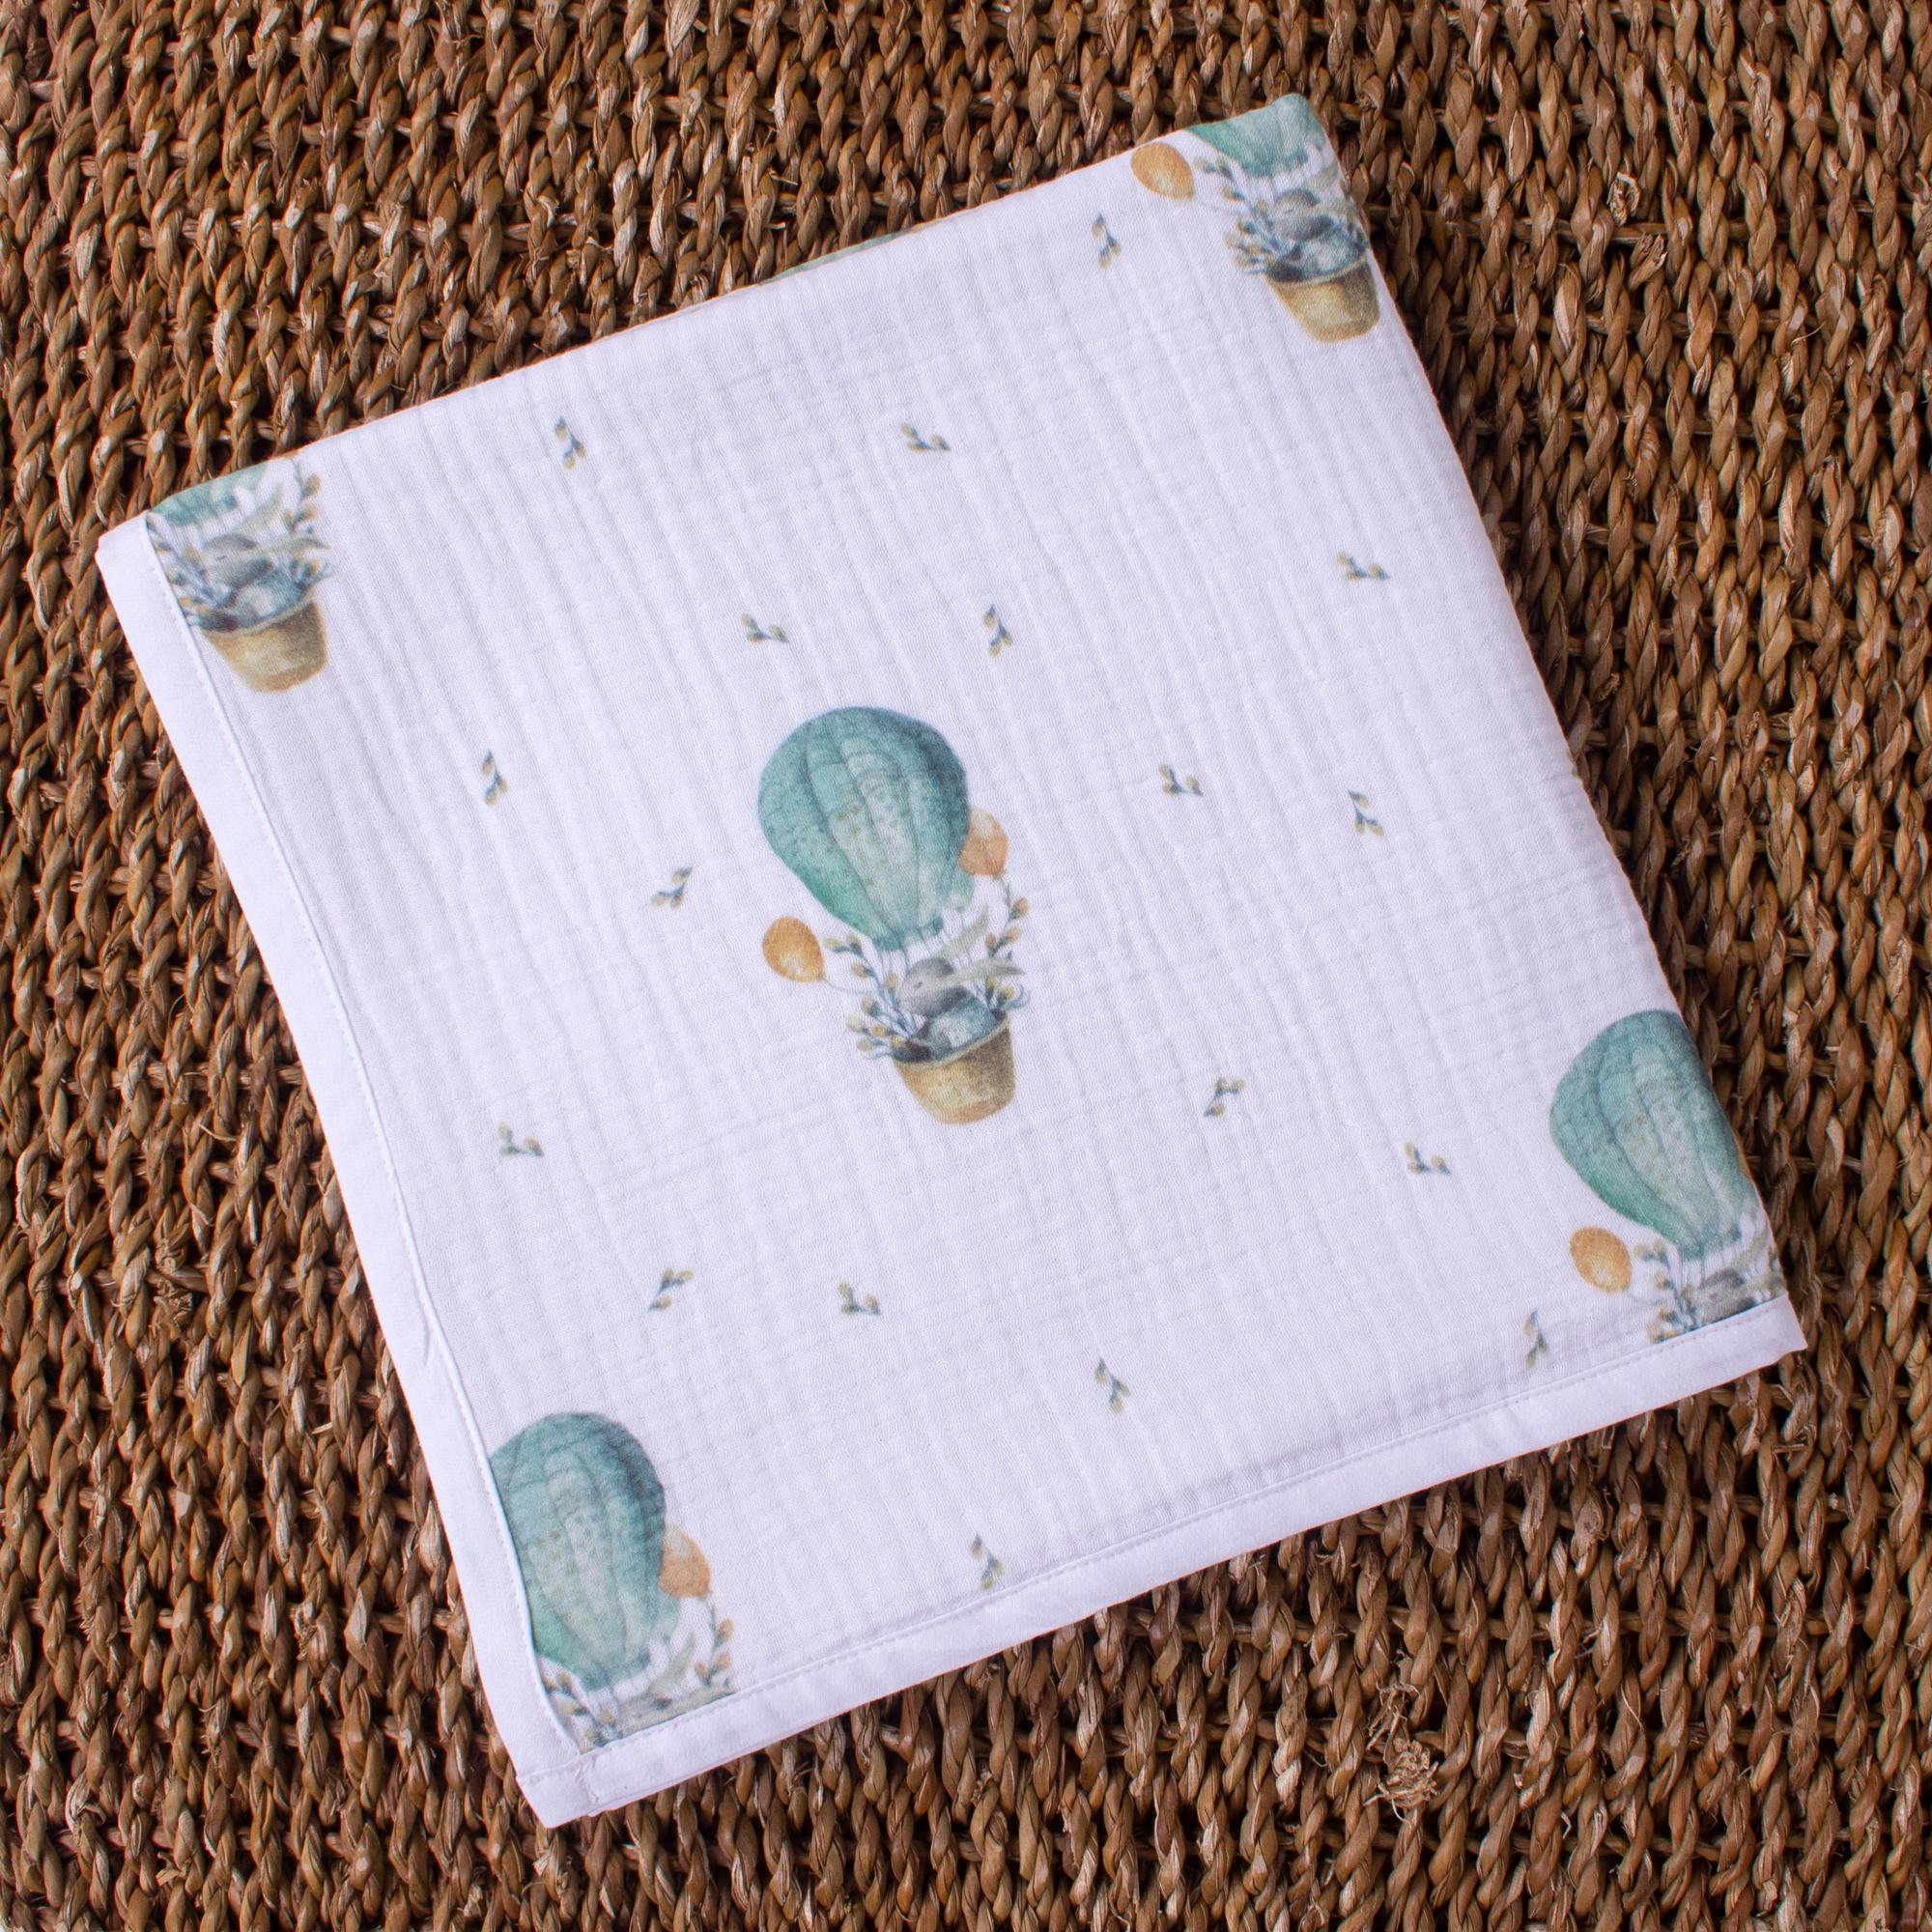 Organic 4 Layer Patterned Muslin Baby Blanket - Rabbit And Flying Balloon